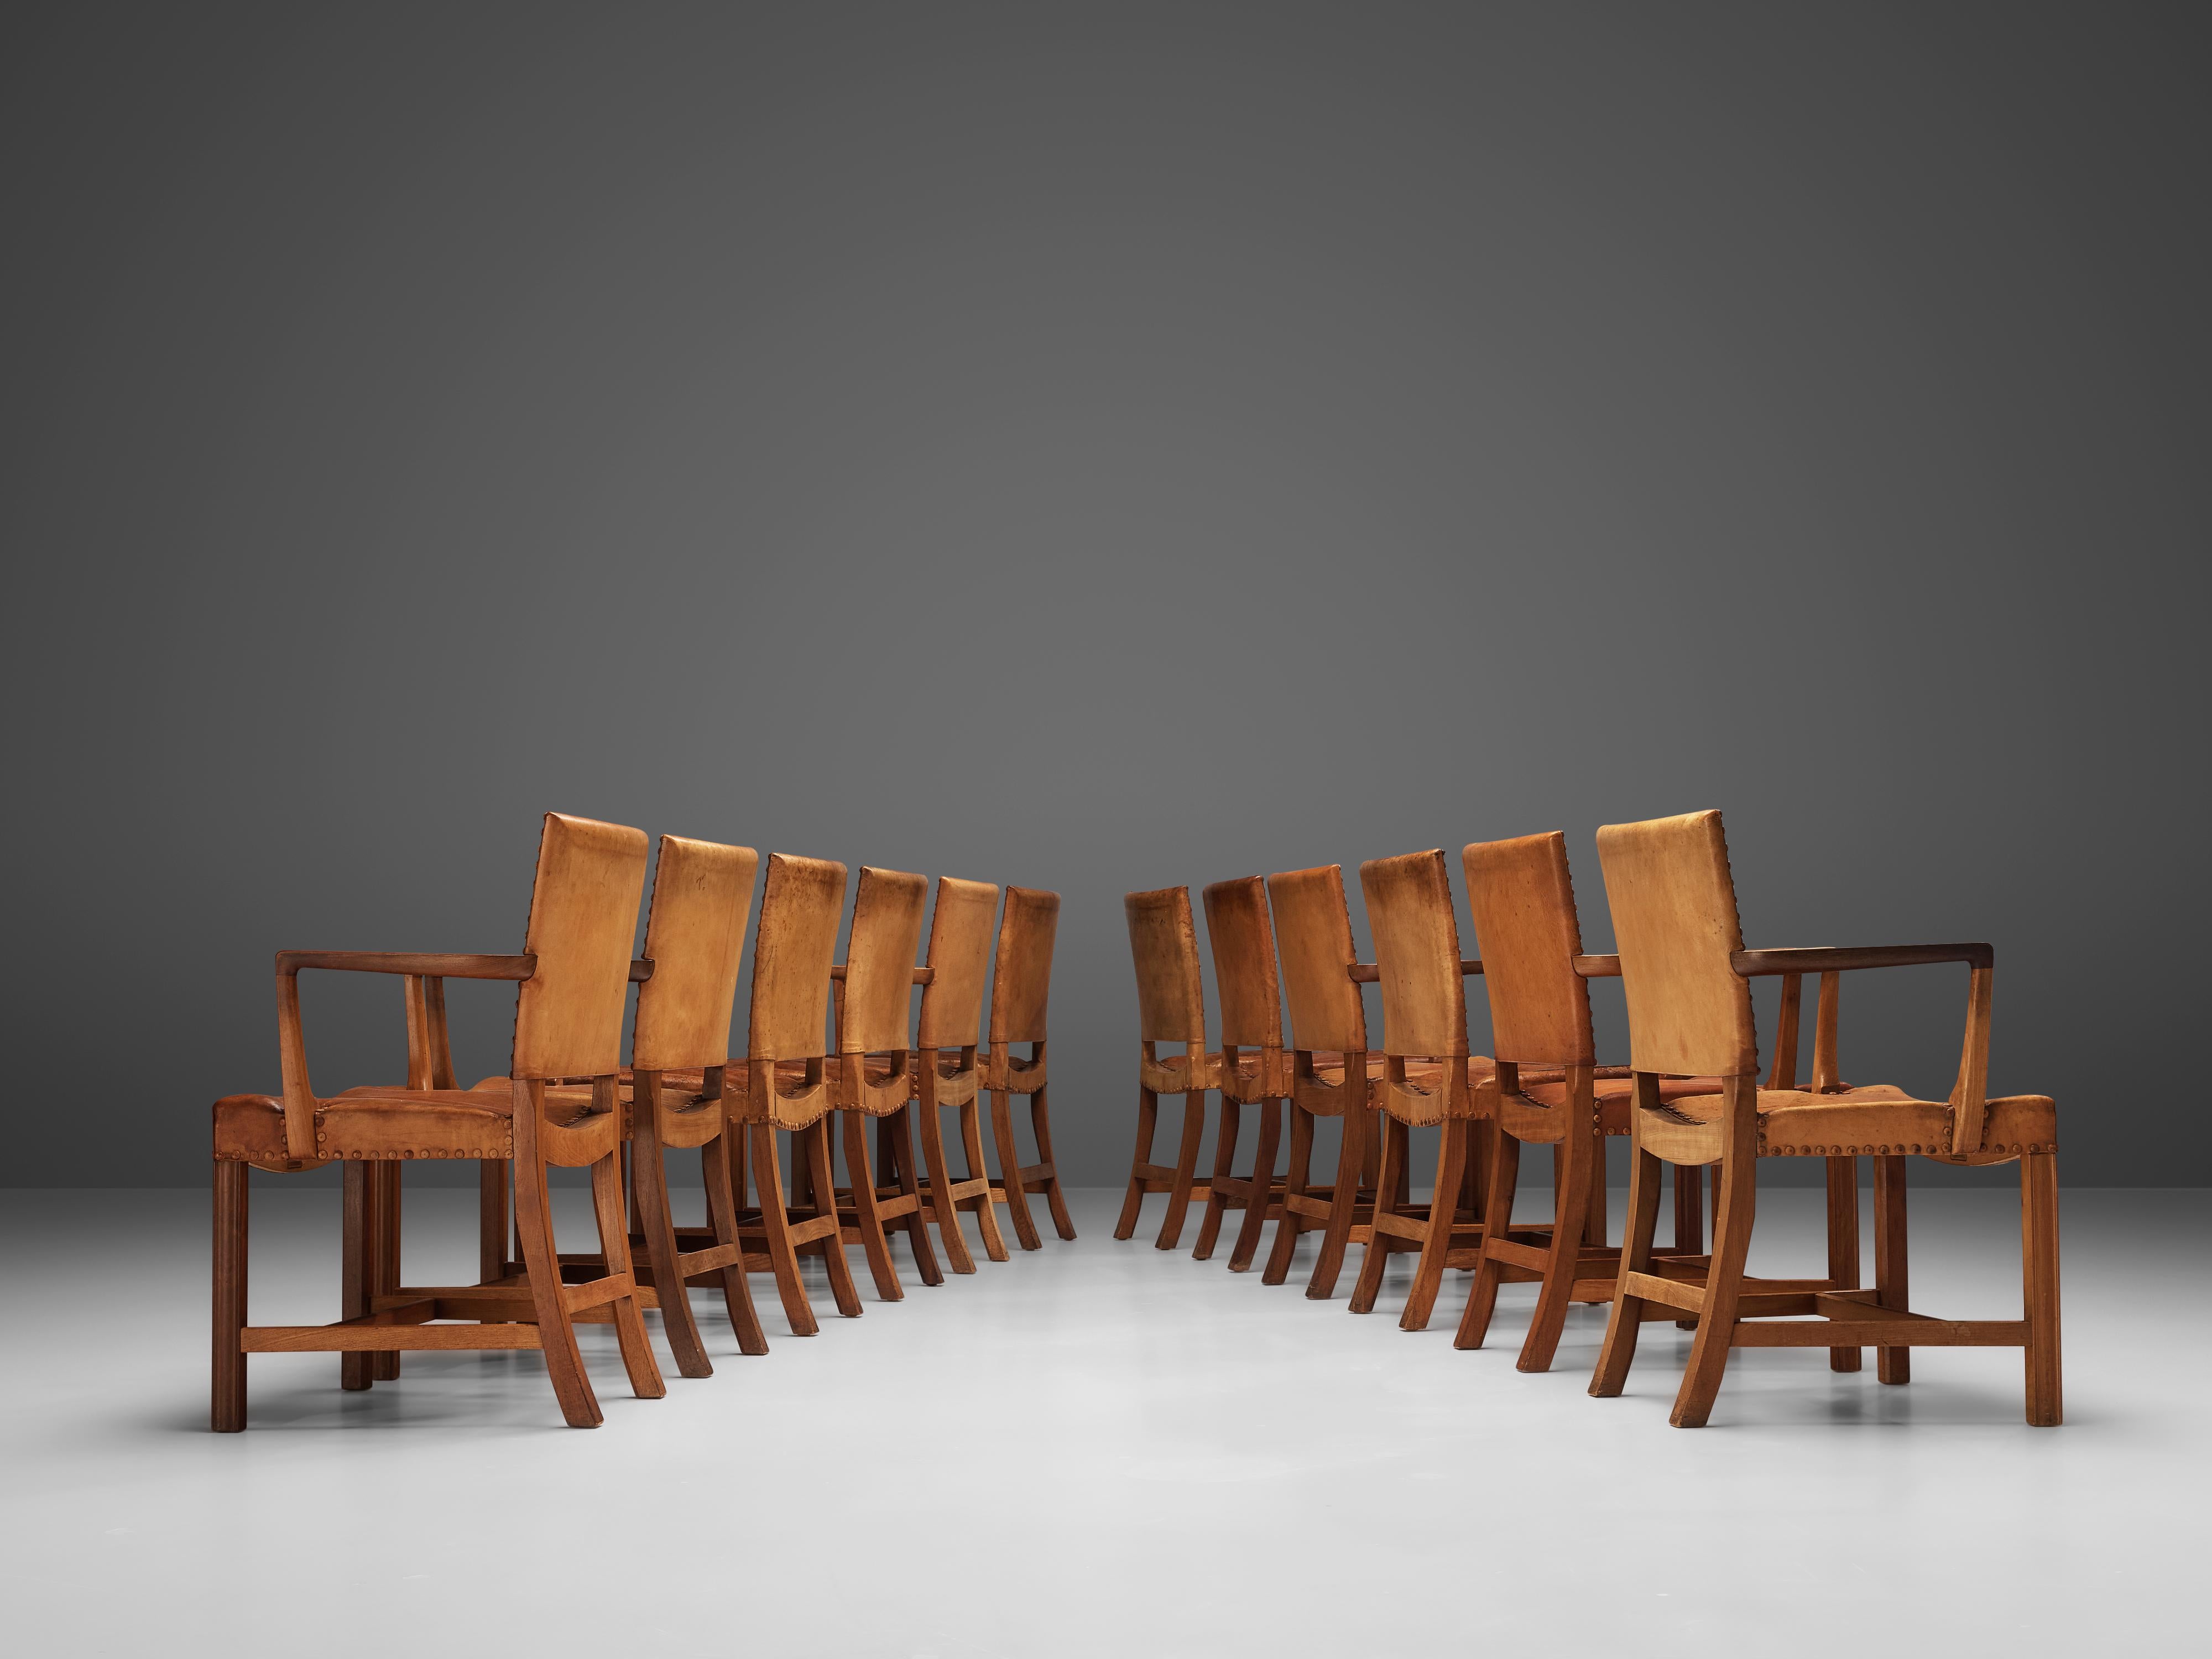 Kaare Klint for Rud Rasmussen, set of twelve dining chairs 'The Red Chair', model 3758, oak, original patinated Niger leather, brass nails, Denmark, designed 1930

Set of twelve dining chairs with and without armrests designed by Kaare Klint in 1930